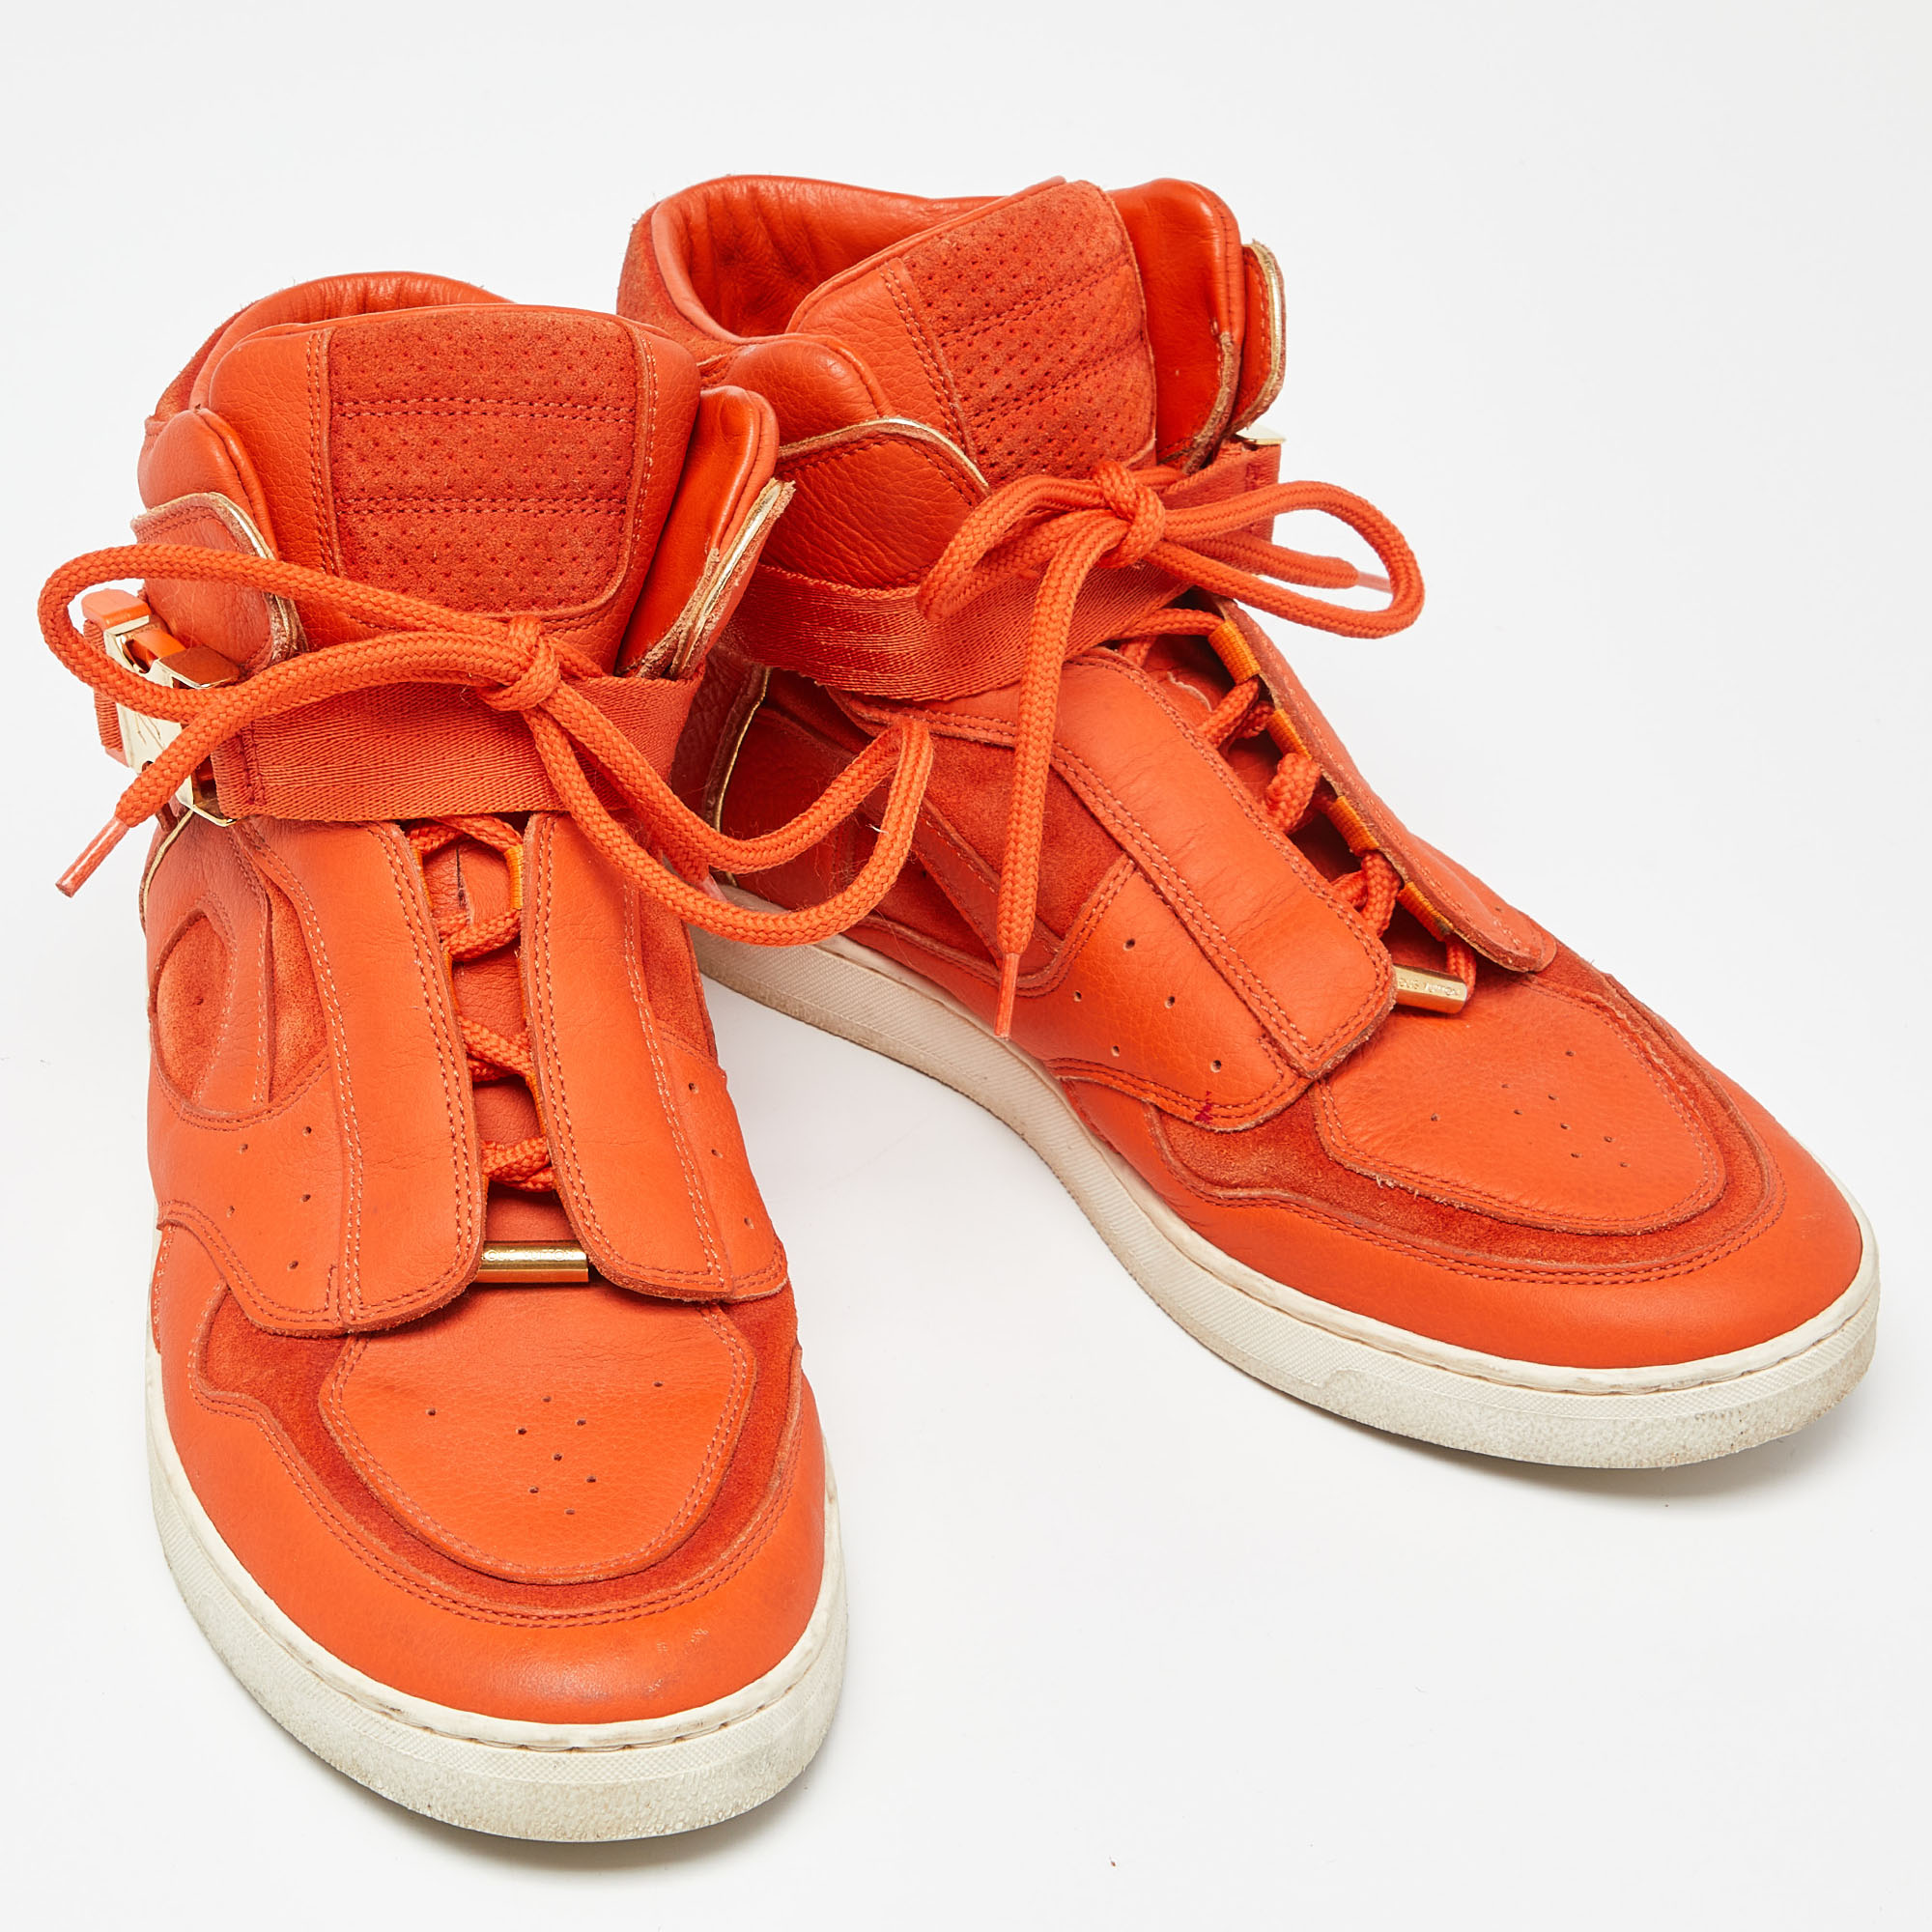 Louis Vuitton Orange Leather And Suede Slipstream High Top Sneakers Size 36